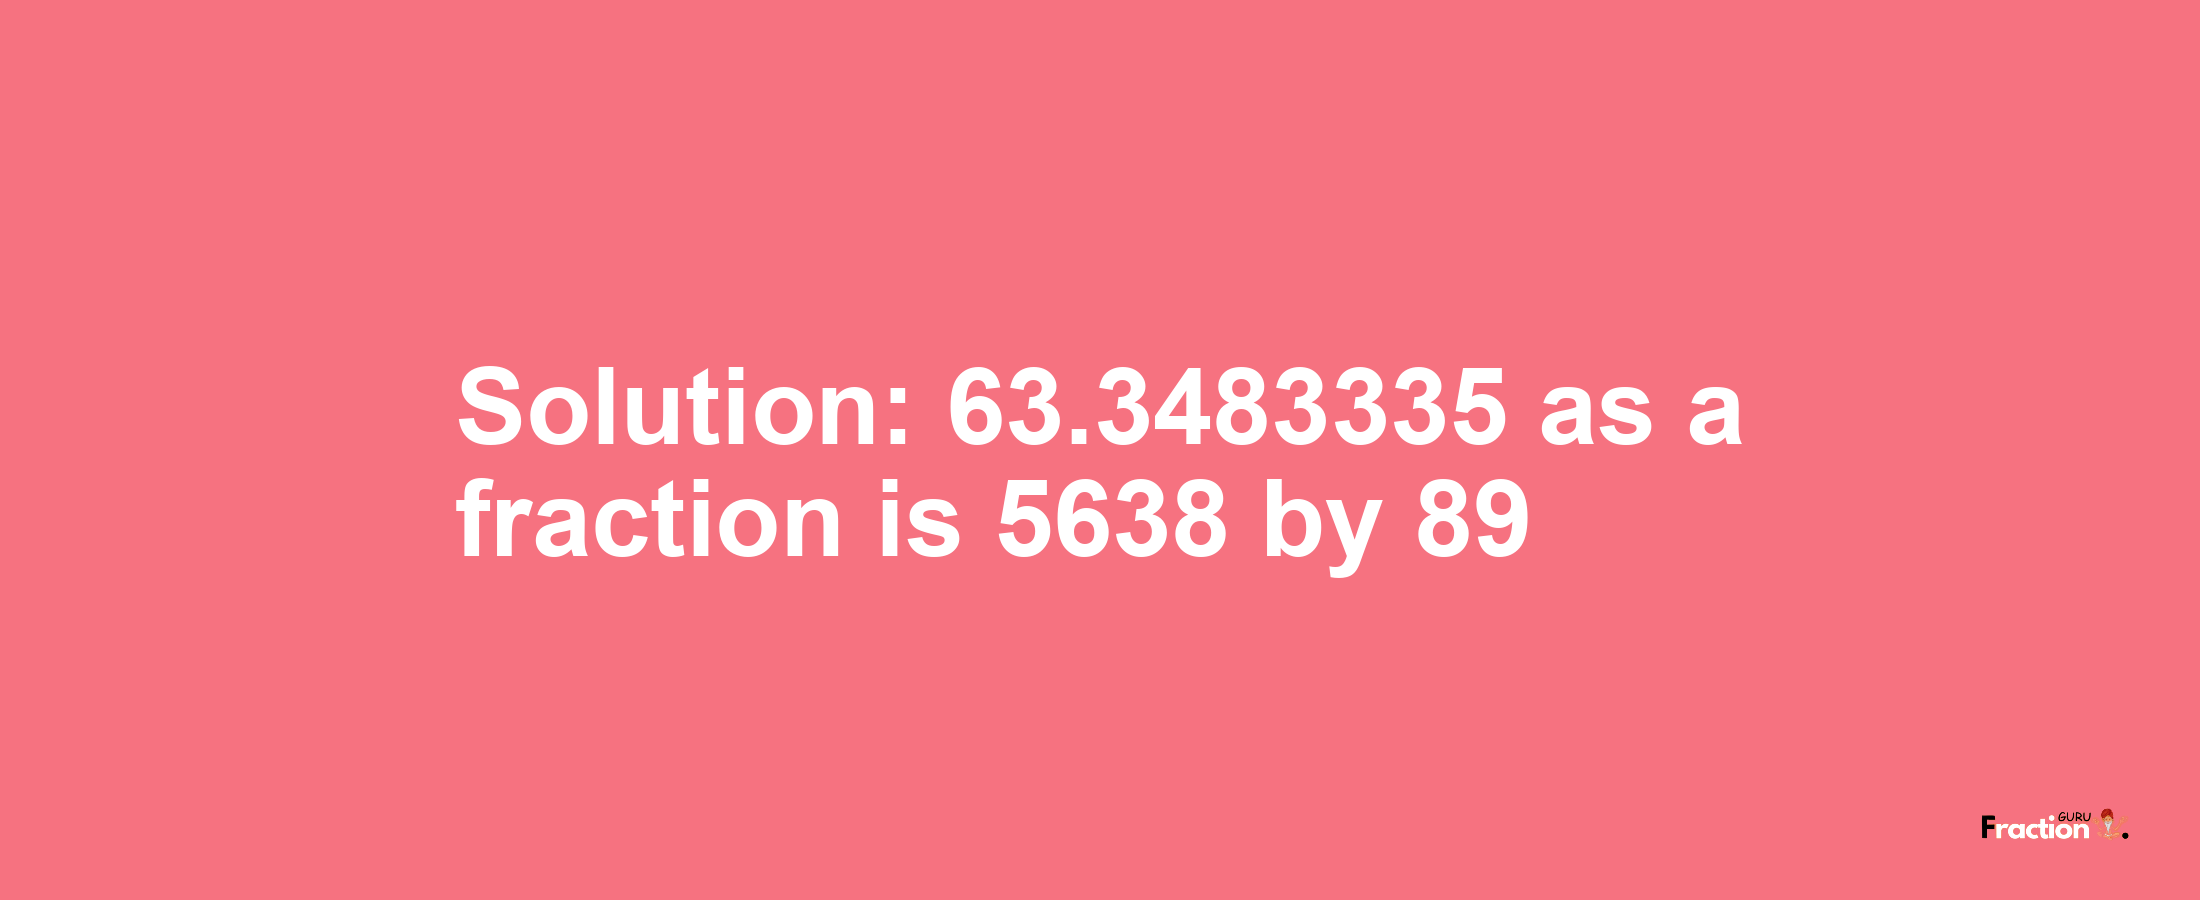 Solution:63.3483335 as a fraction is 5638/89